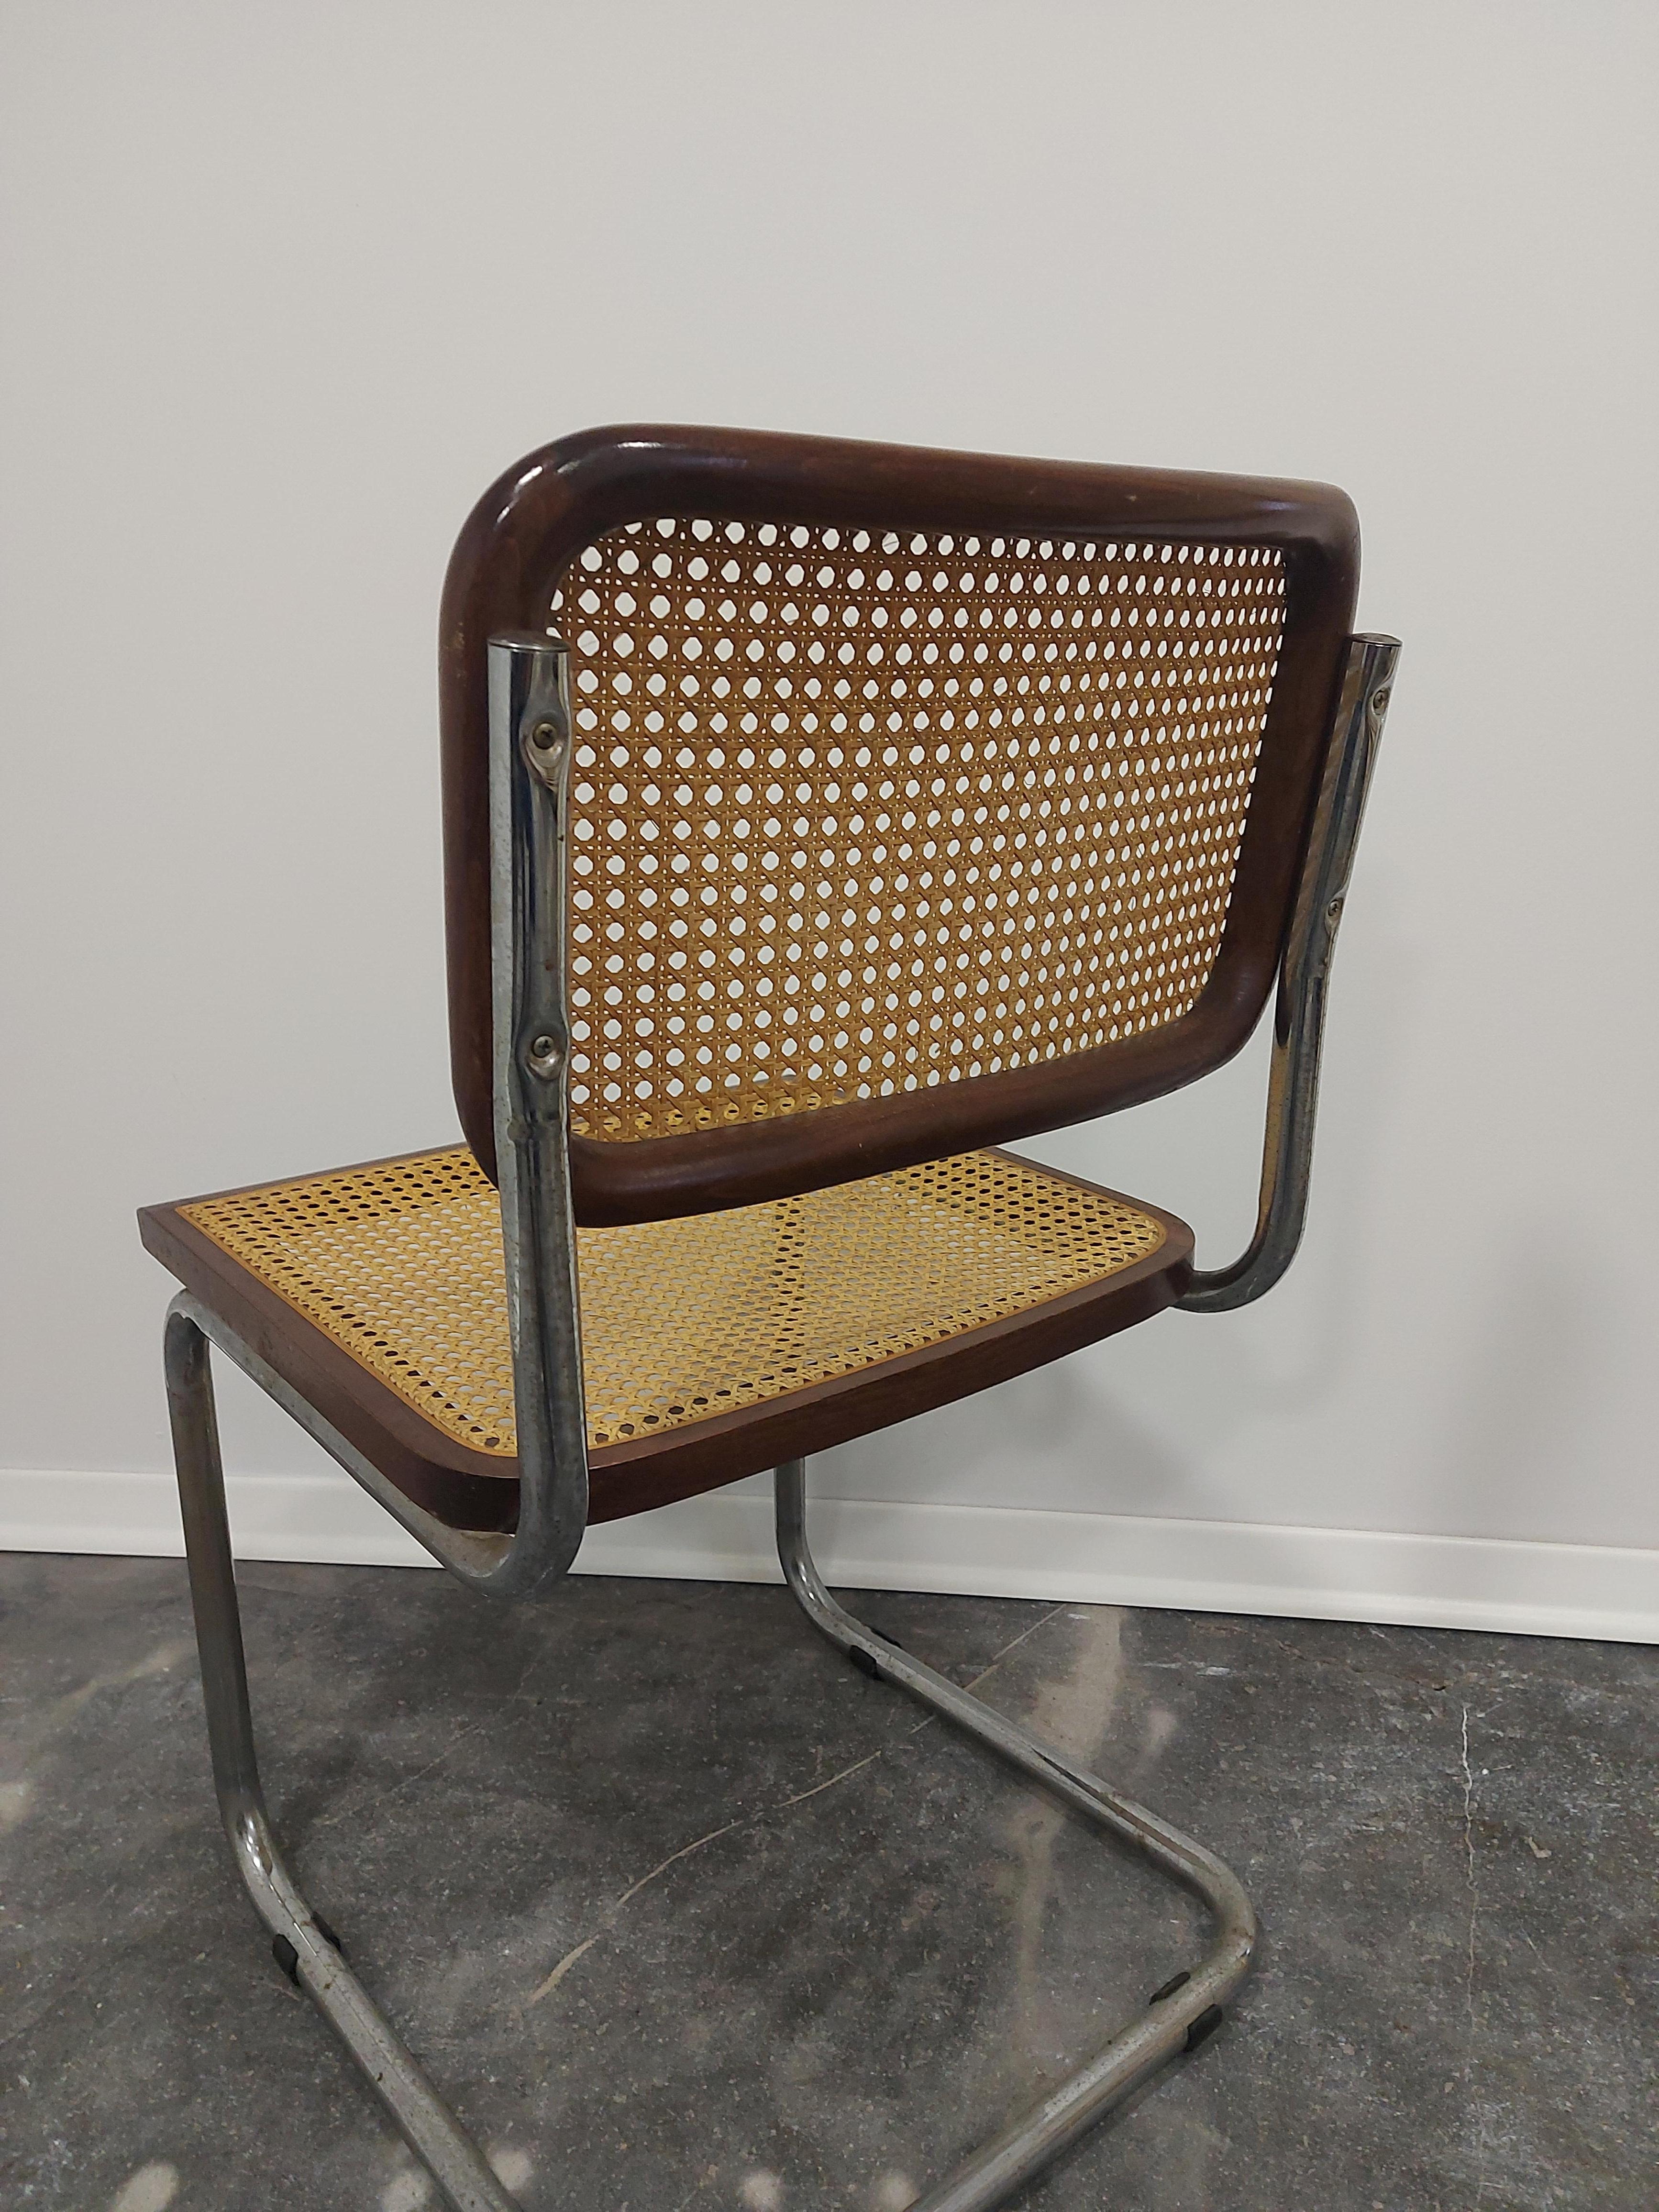 Cesca Chair by Marcel Breuer 1970s B32 1 of 5 For Sale 4